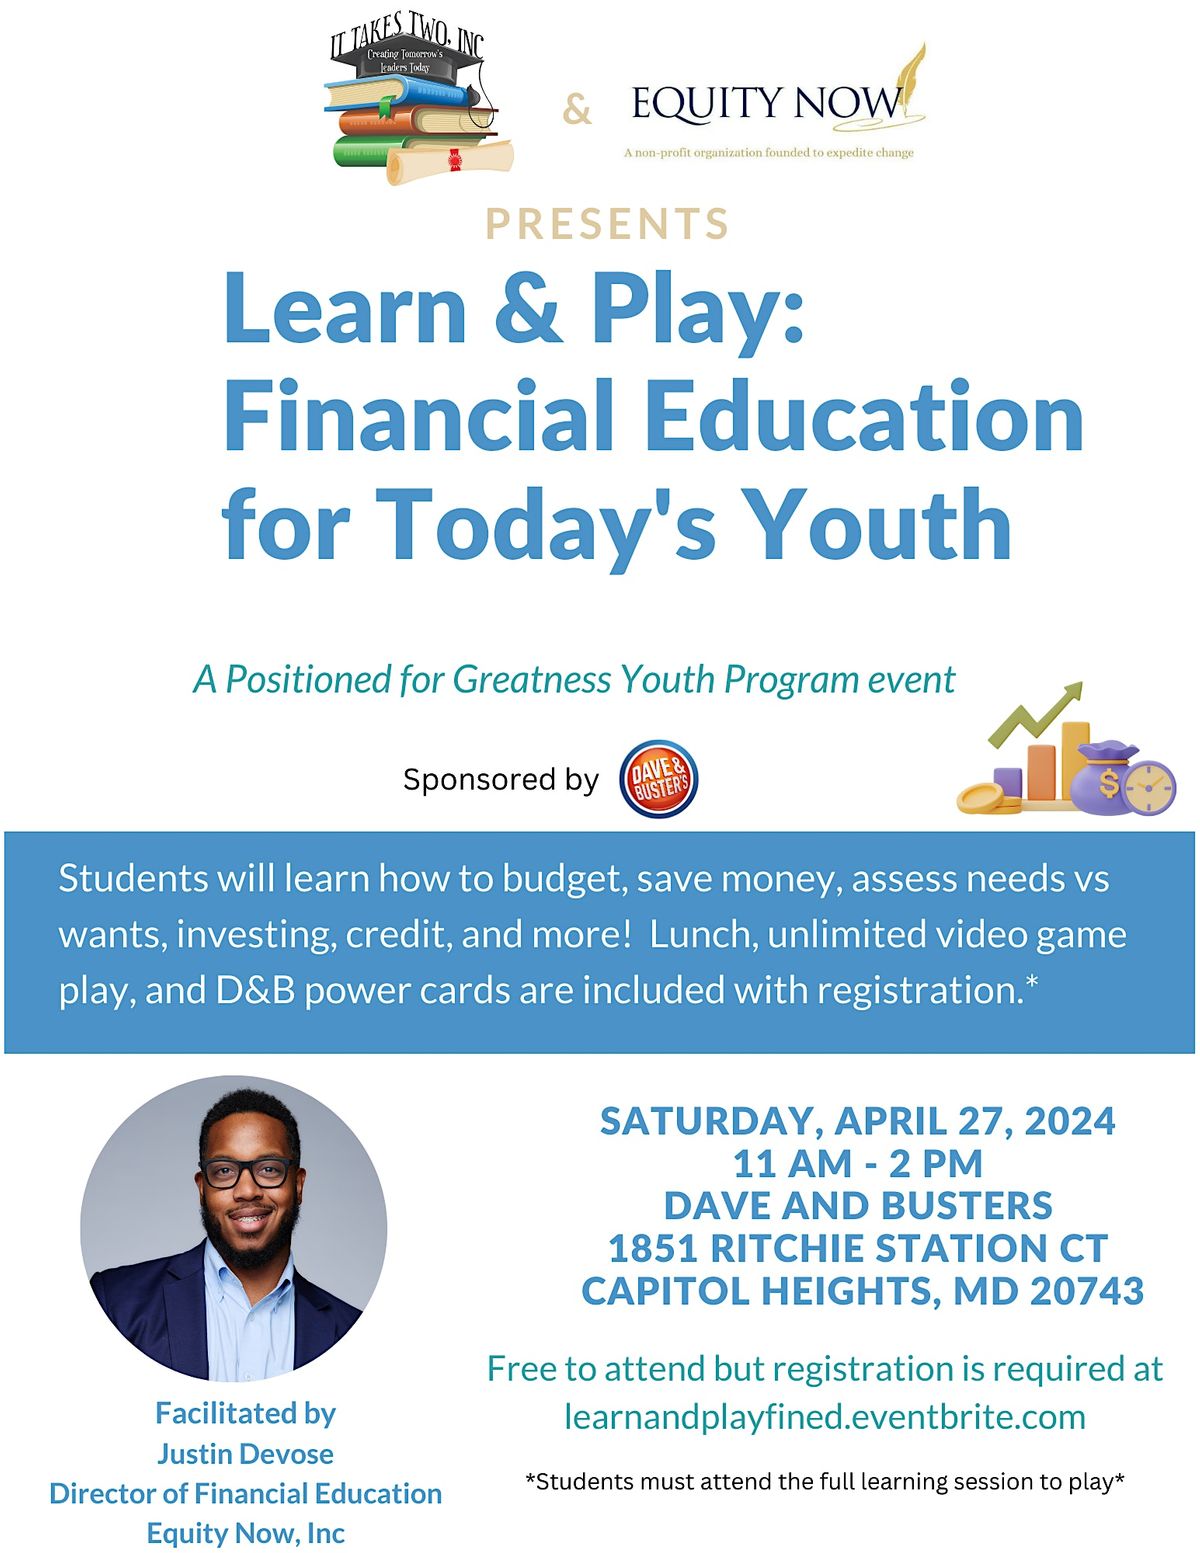 Learn & Play: Financial Education for Today's Youth